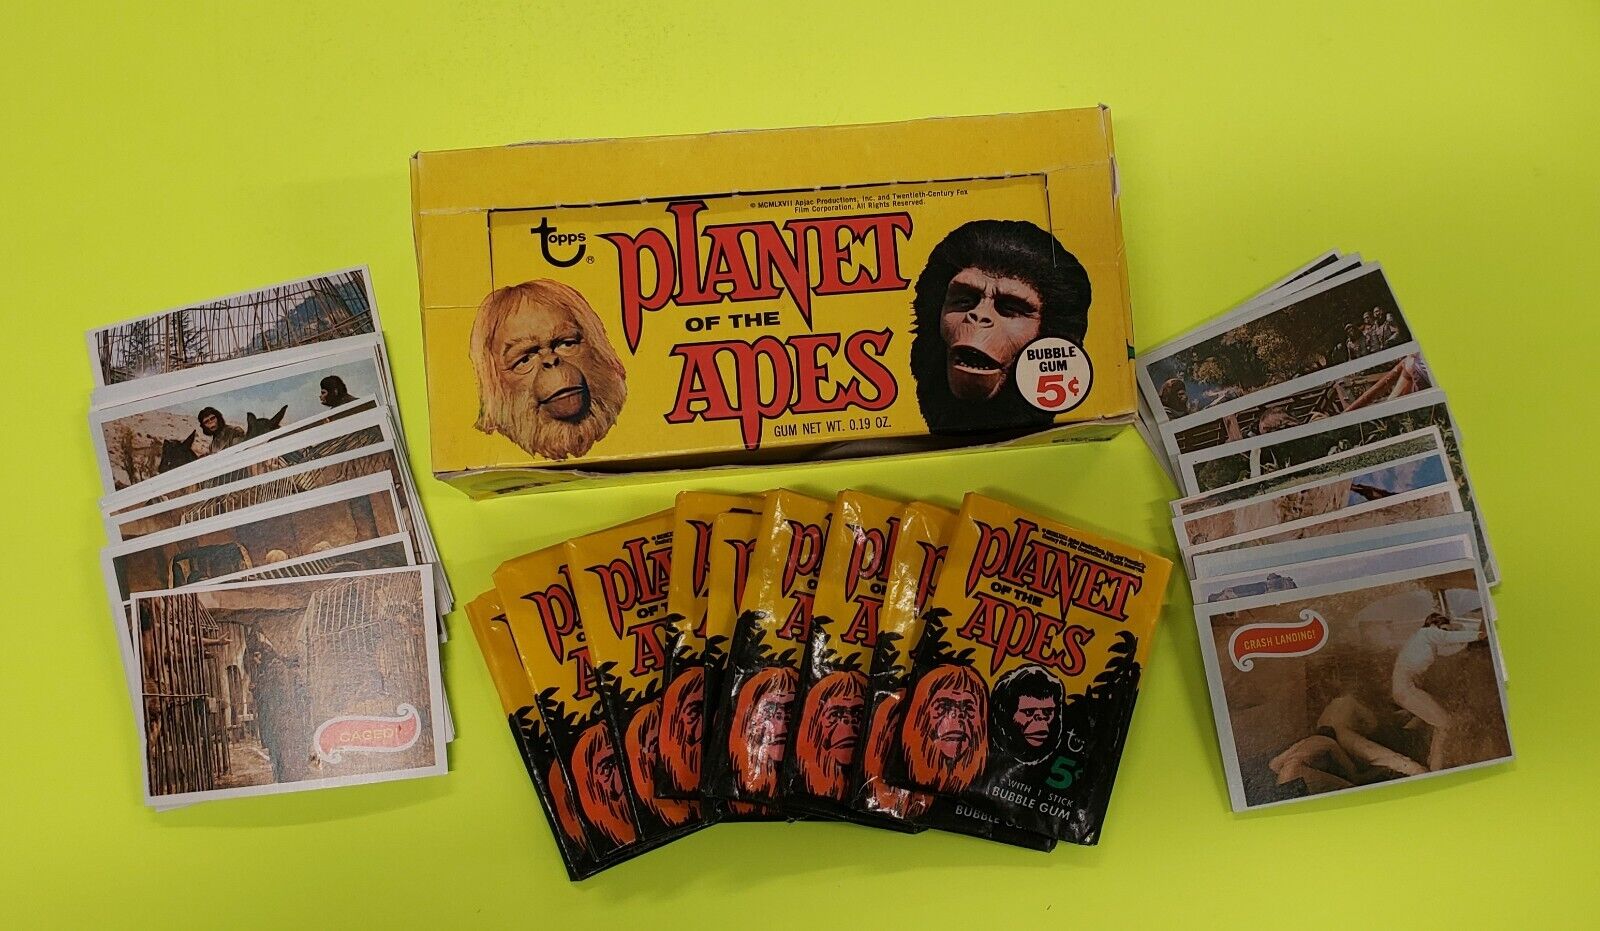 1969 Planet of the Apes Complete Set, Empty Wrappers, Display Box Vintage Topps